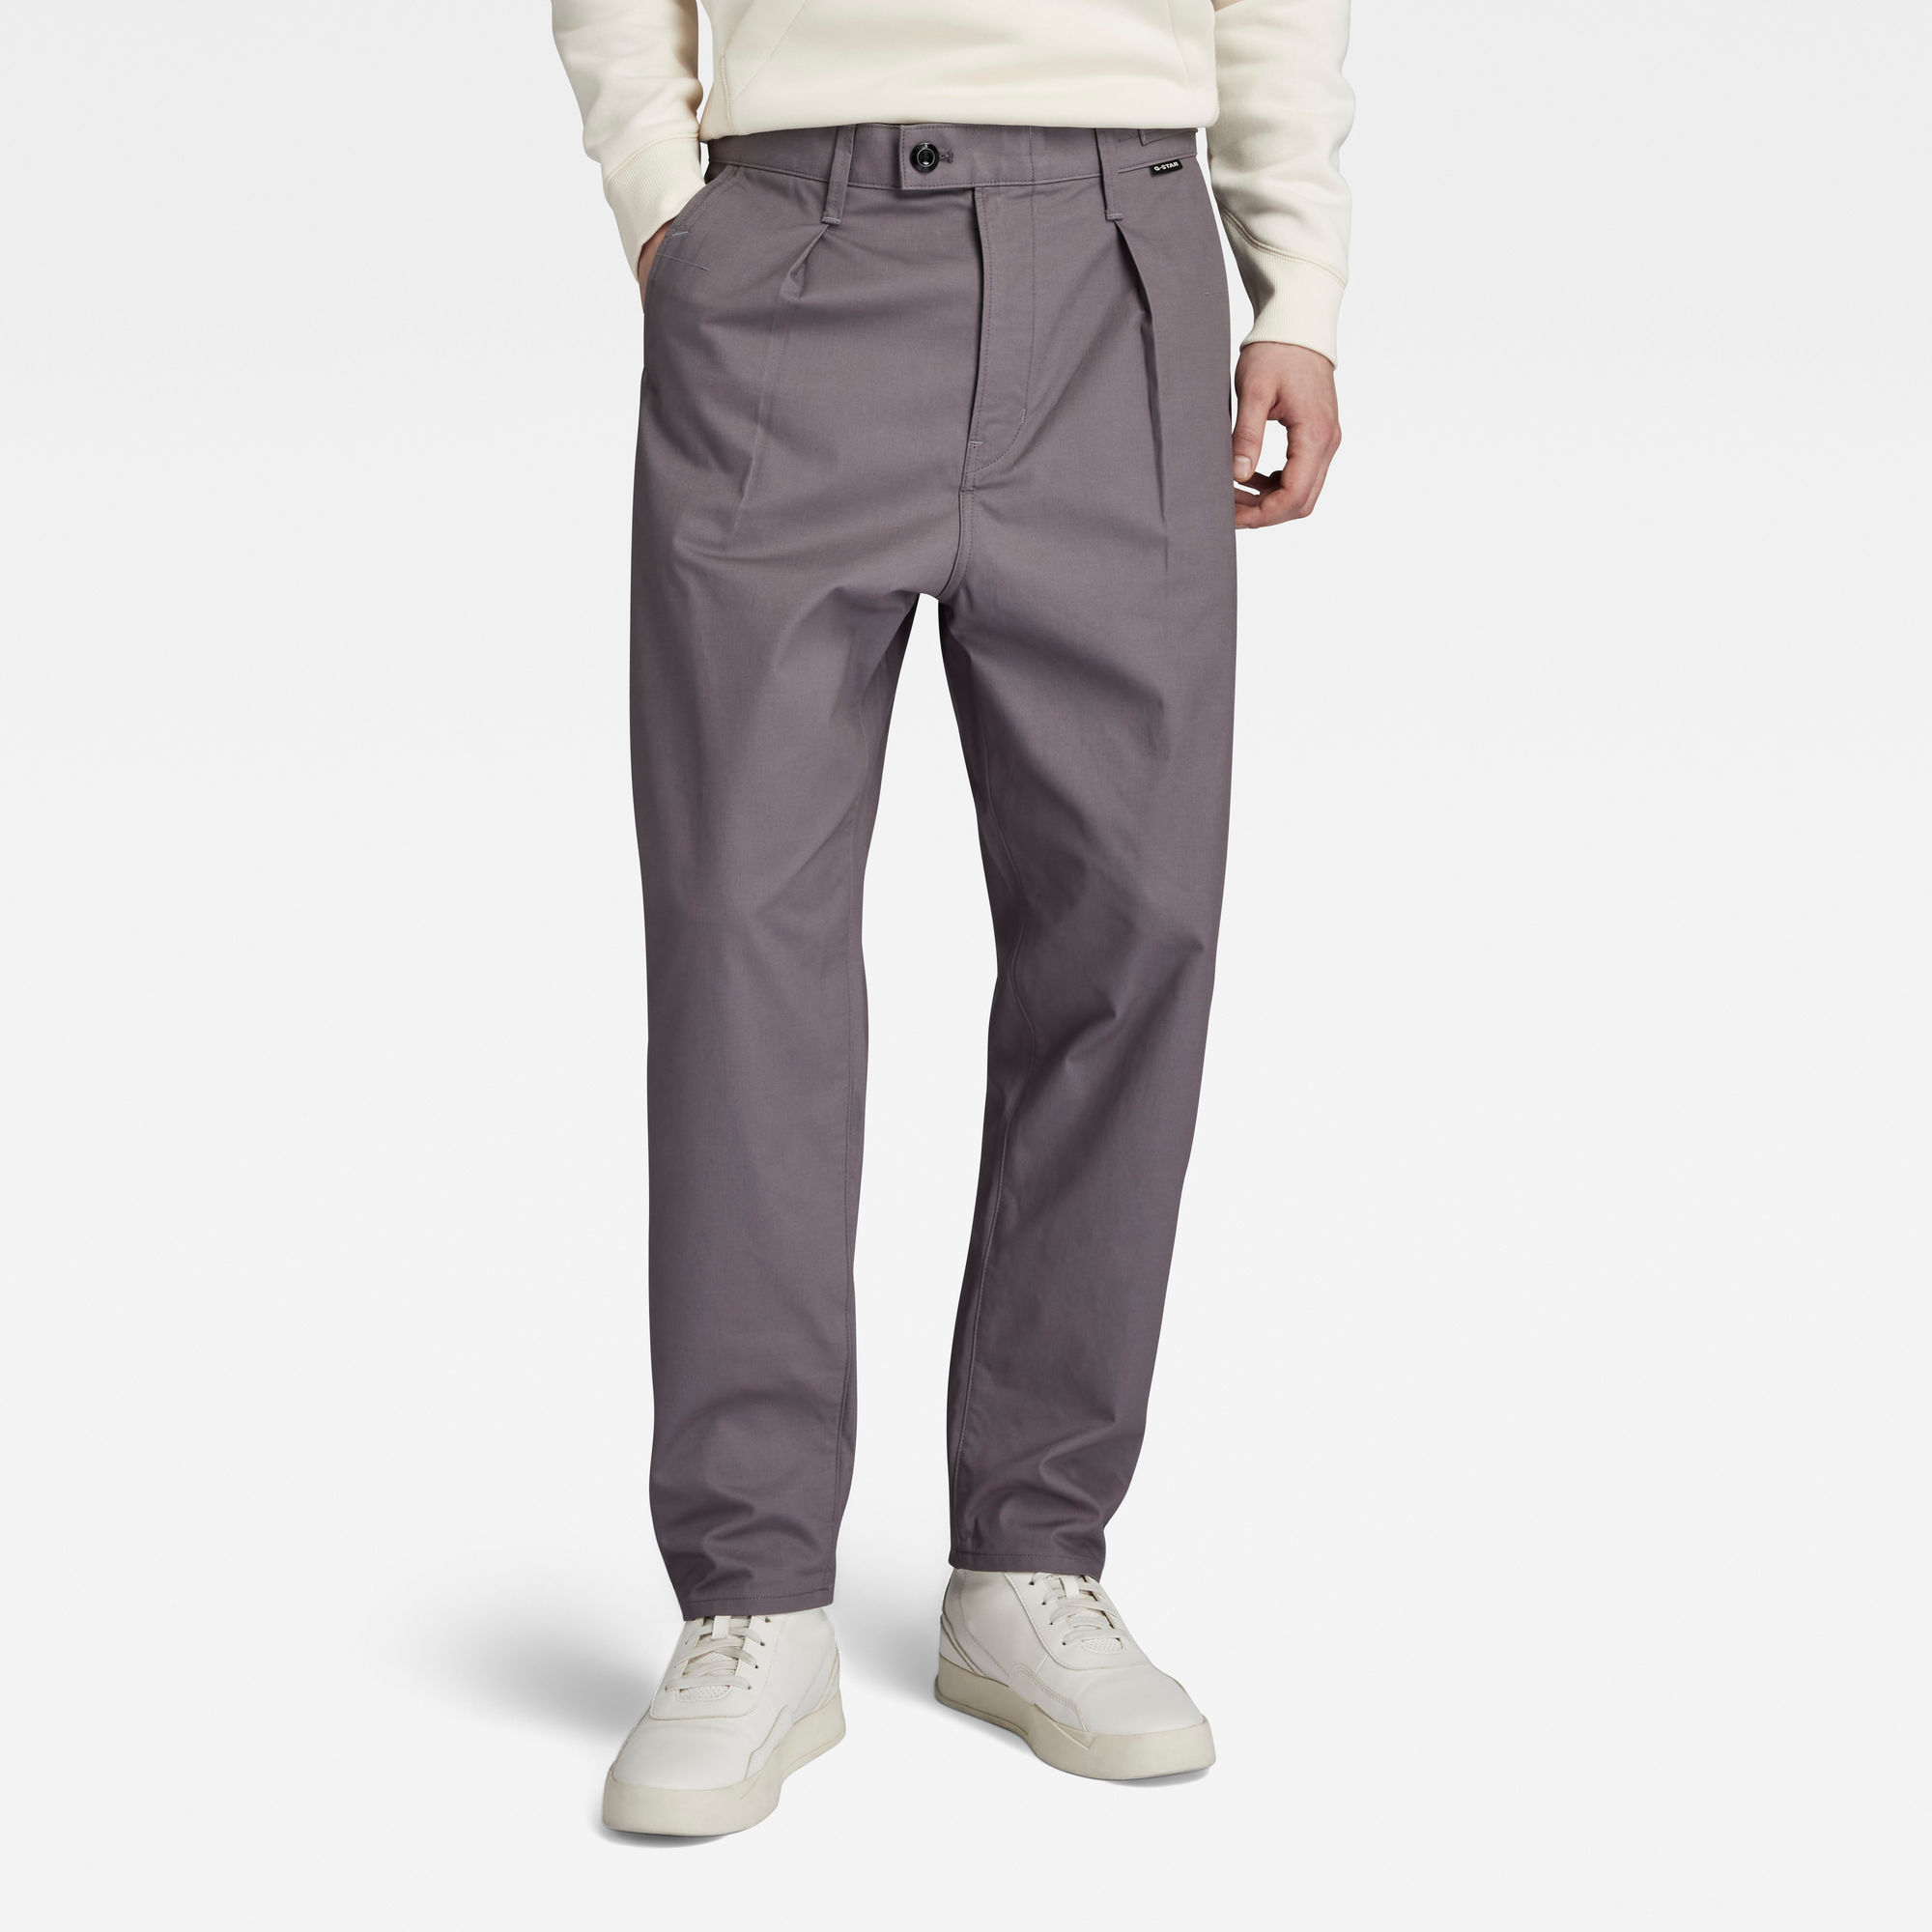 G-Star RAW Unisex Pleated Chino Relaxed Grijs Heren